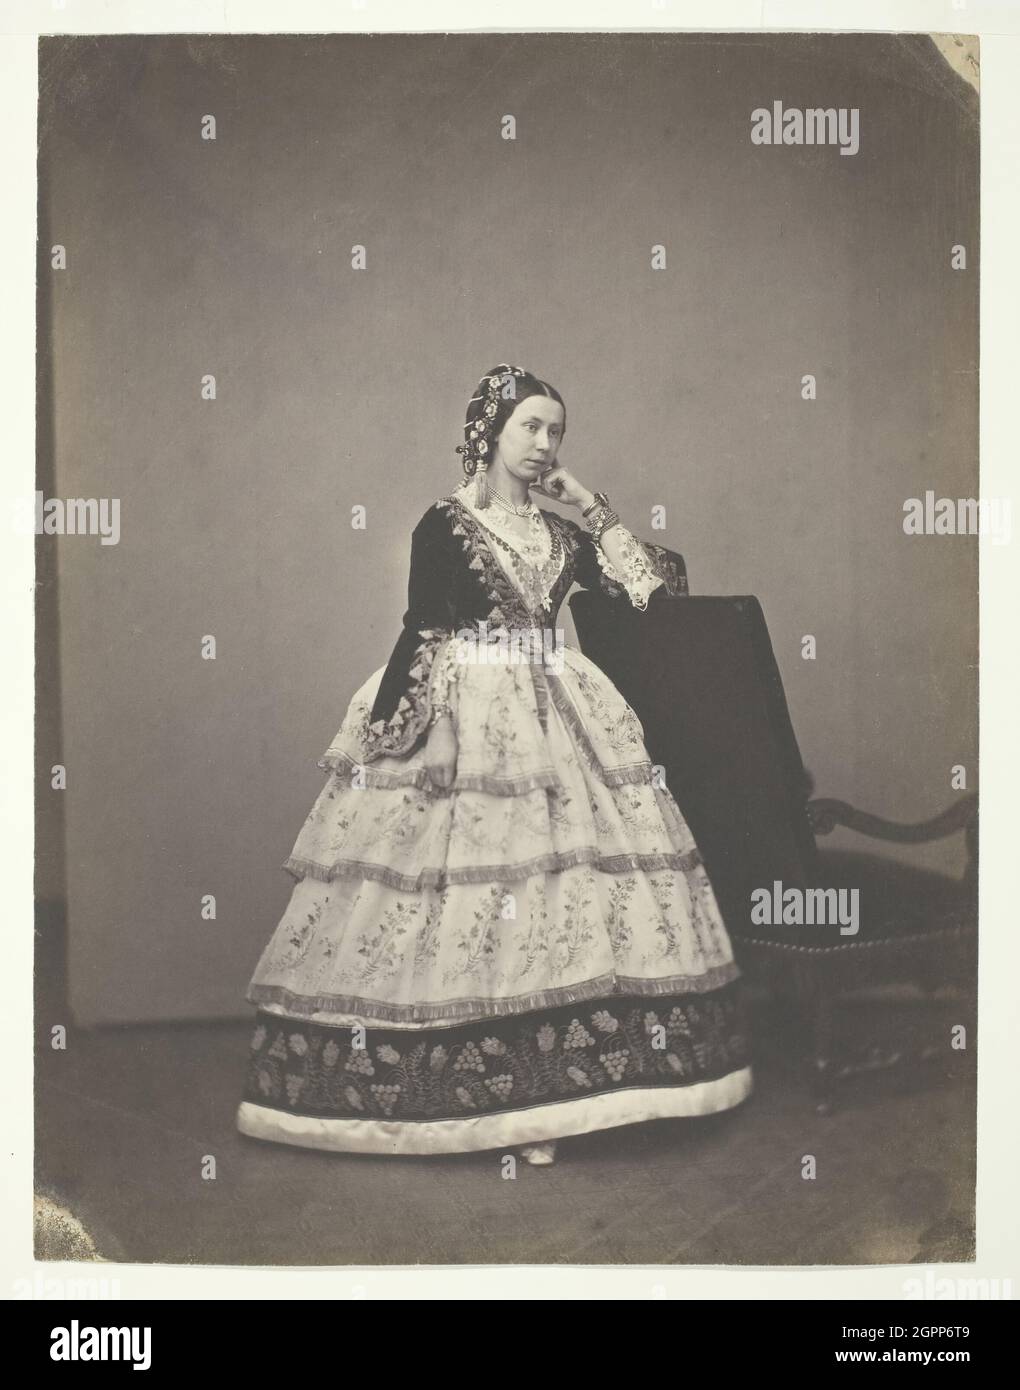 Madame Carrelle, 1856/57. [Woman wearing embroidered dress with fitted bodice and lace sleeves]. Salted paper print. Stock Photo